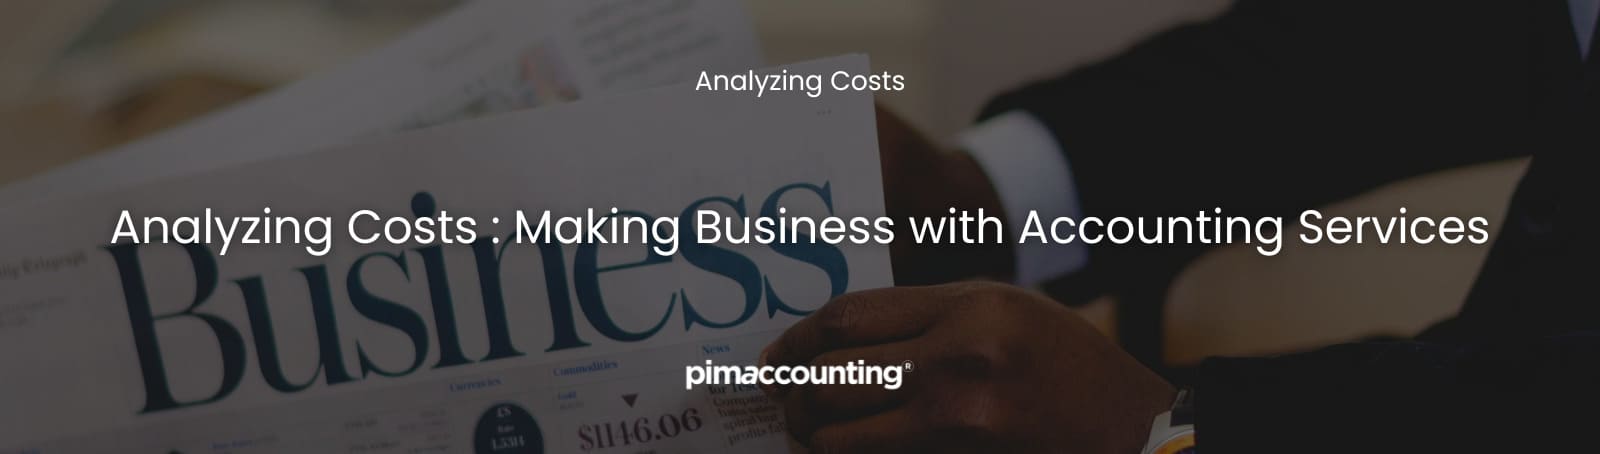 Analyzing Costs: Making Business with Accounting Services